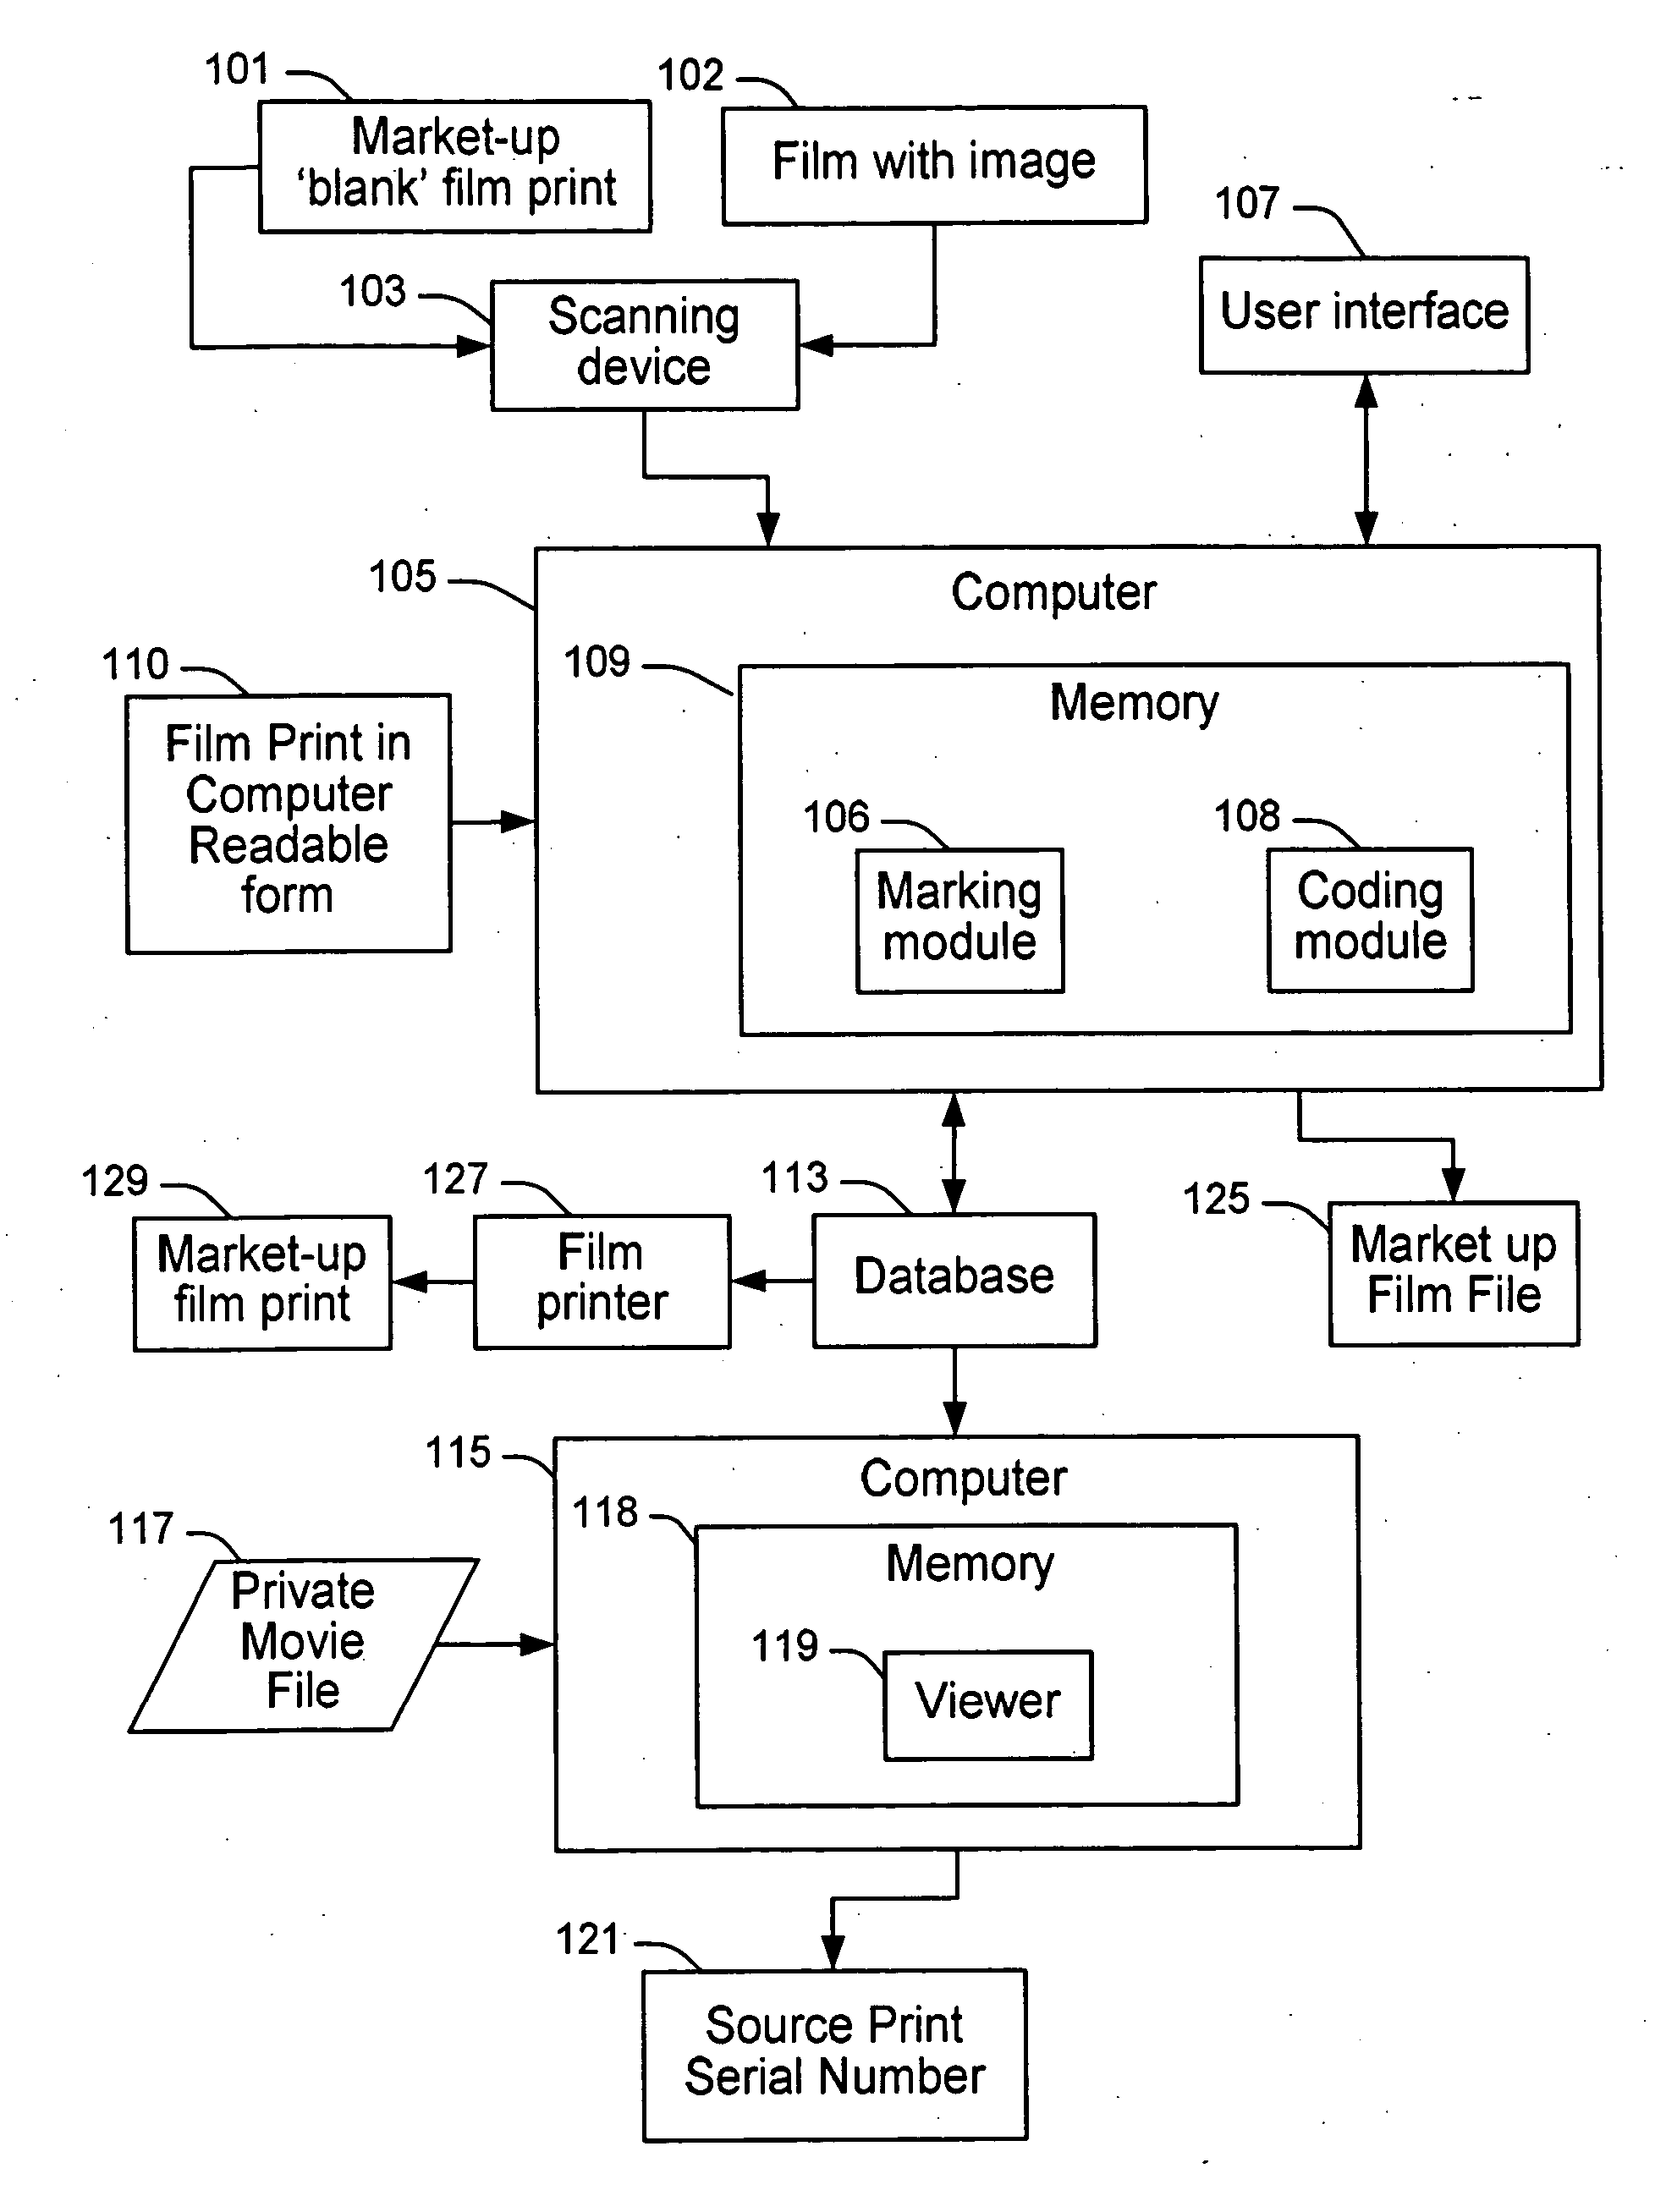 System and method for adaptive marking and coding of film prints